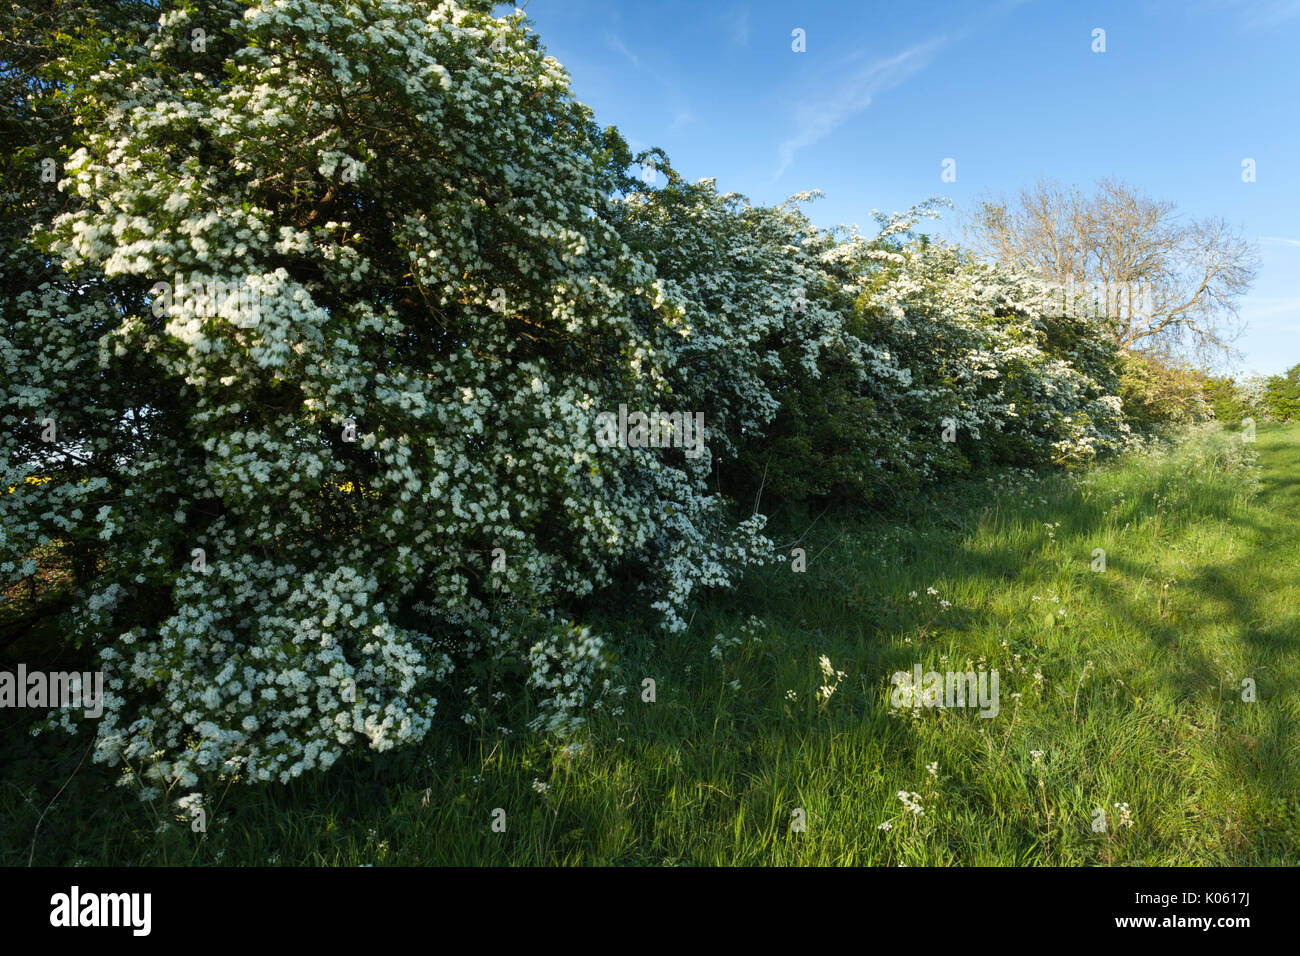 A high rural hawthorn hedgerow (Crataegus Monogyna) full of white blossom on a May evening near Brixworth in Northamptonshire, England. Stock Photo